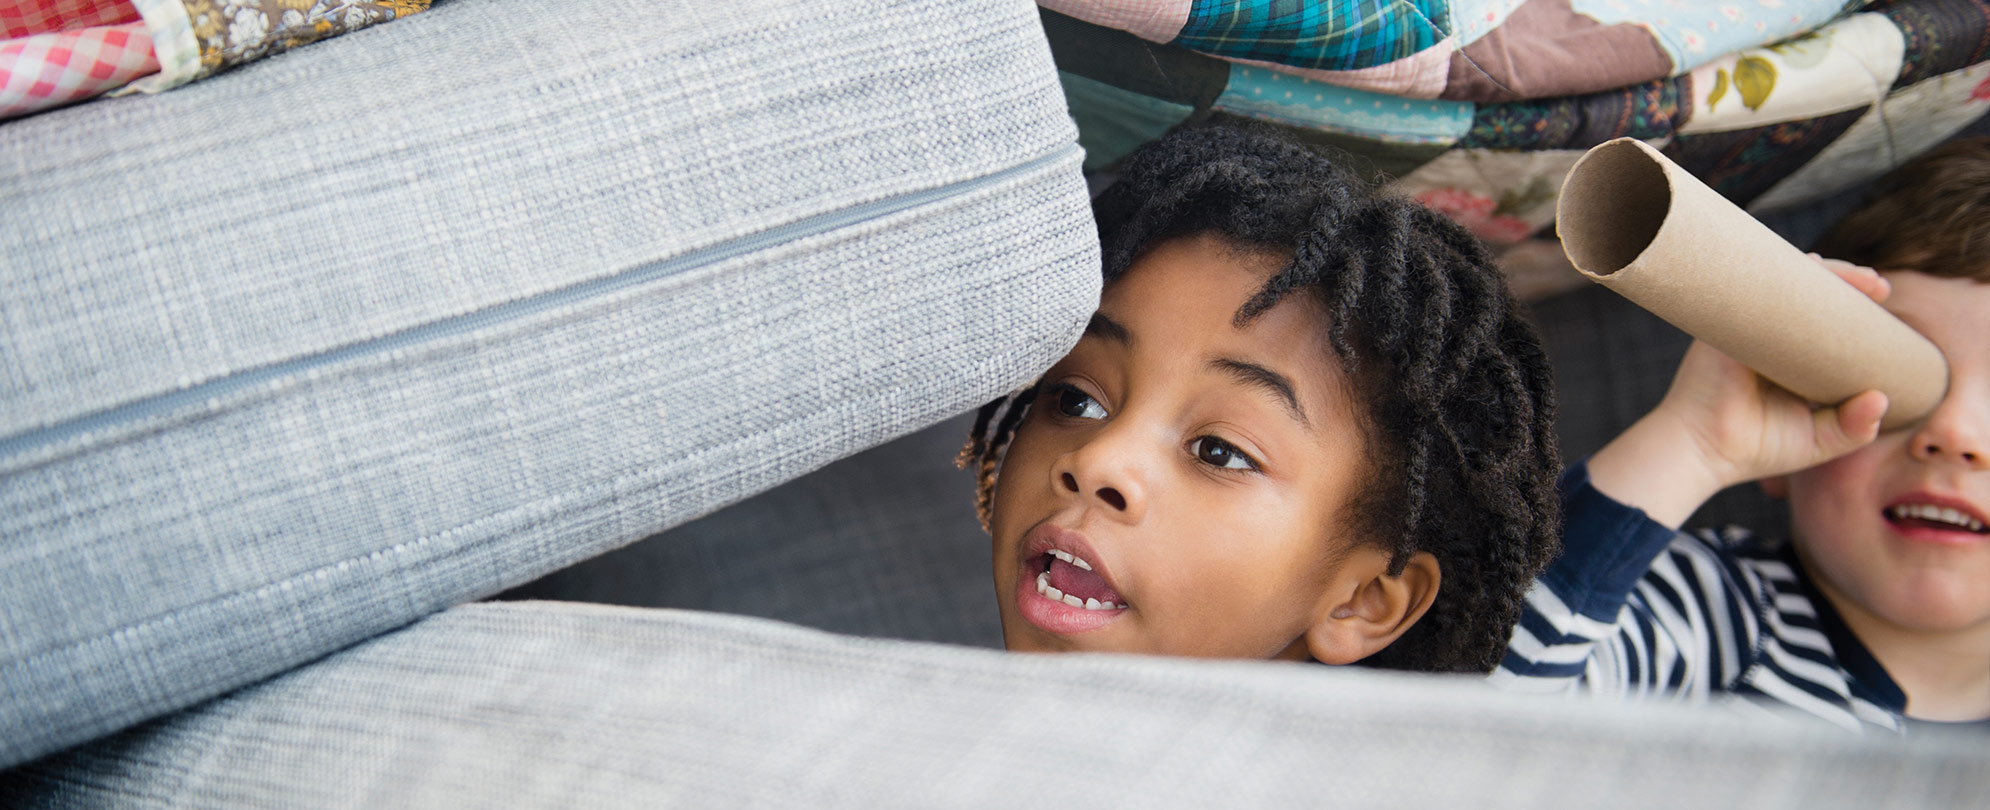 Two kids playing in a pillow fort.